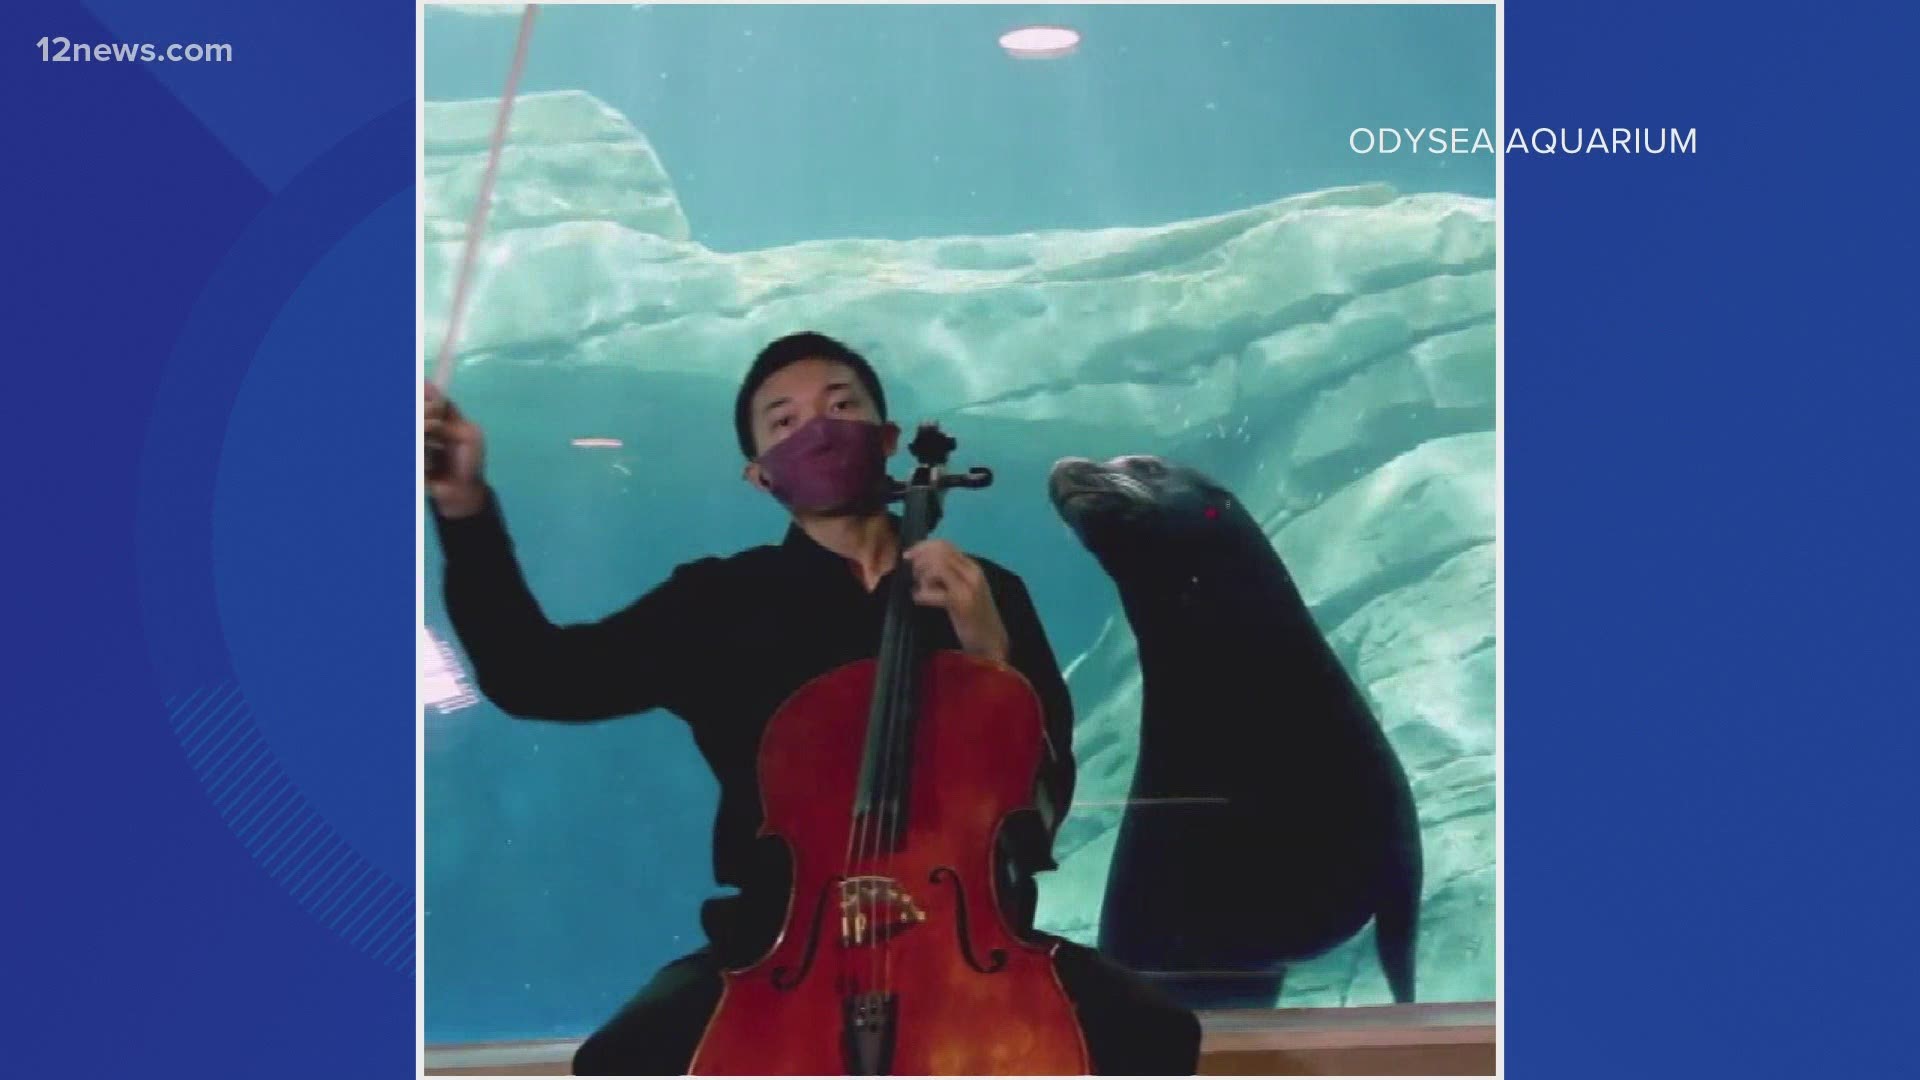 A Valley teen plays the cello for the sea lions at OdySean Aquarium in Scottsdale. Leo Kubota is part of the Musicfest's Youth Performance group.